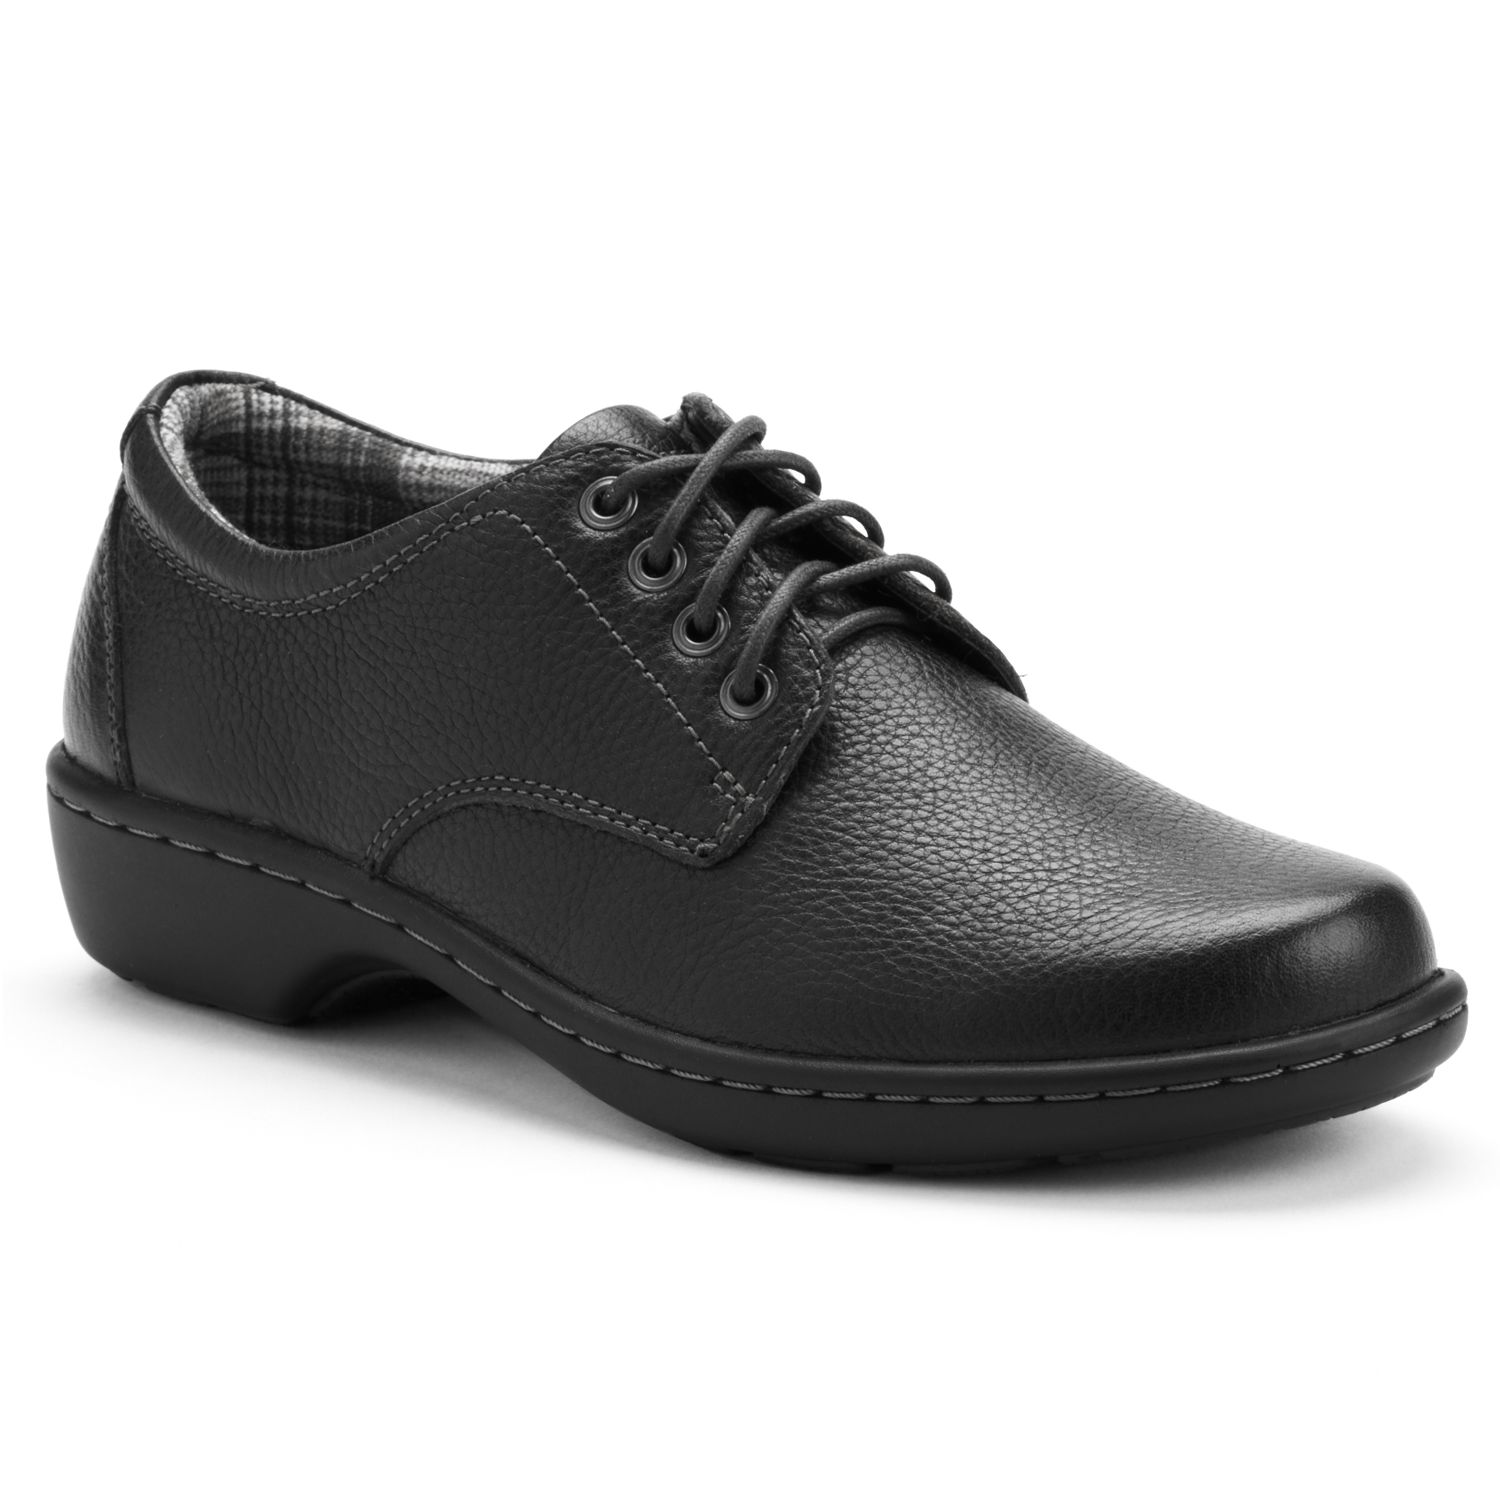 Image for Eastland Alexis Women's Casual Oxford Shoes at Kohl's.